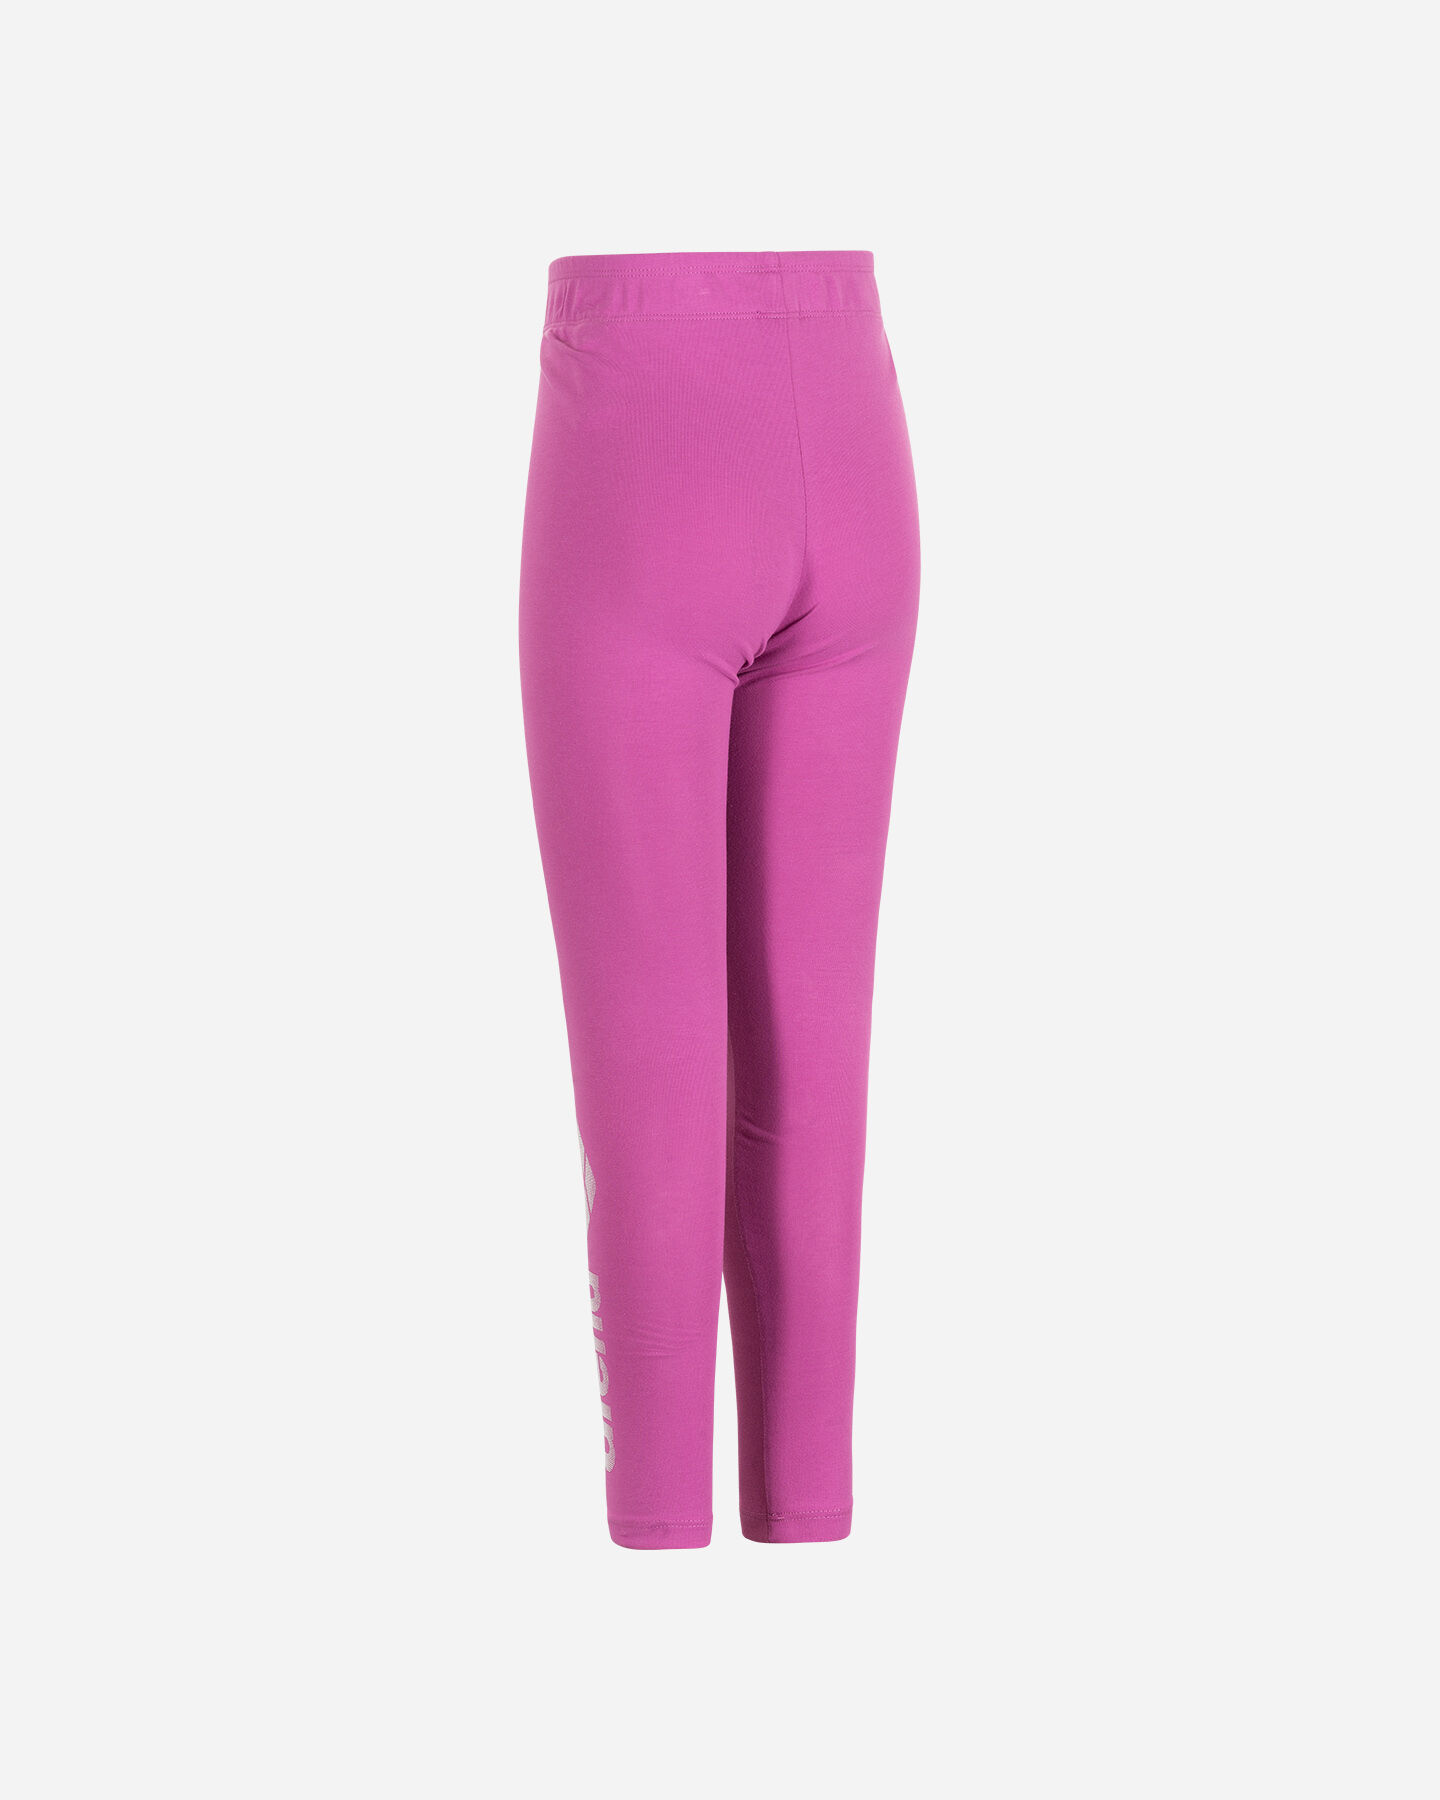  Leggings ARENA BASIC JR S4087430|393|4A scatto 1